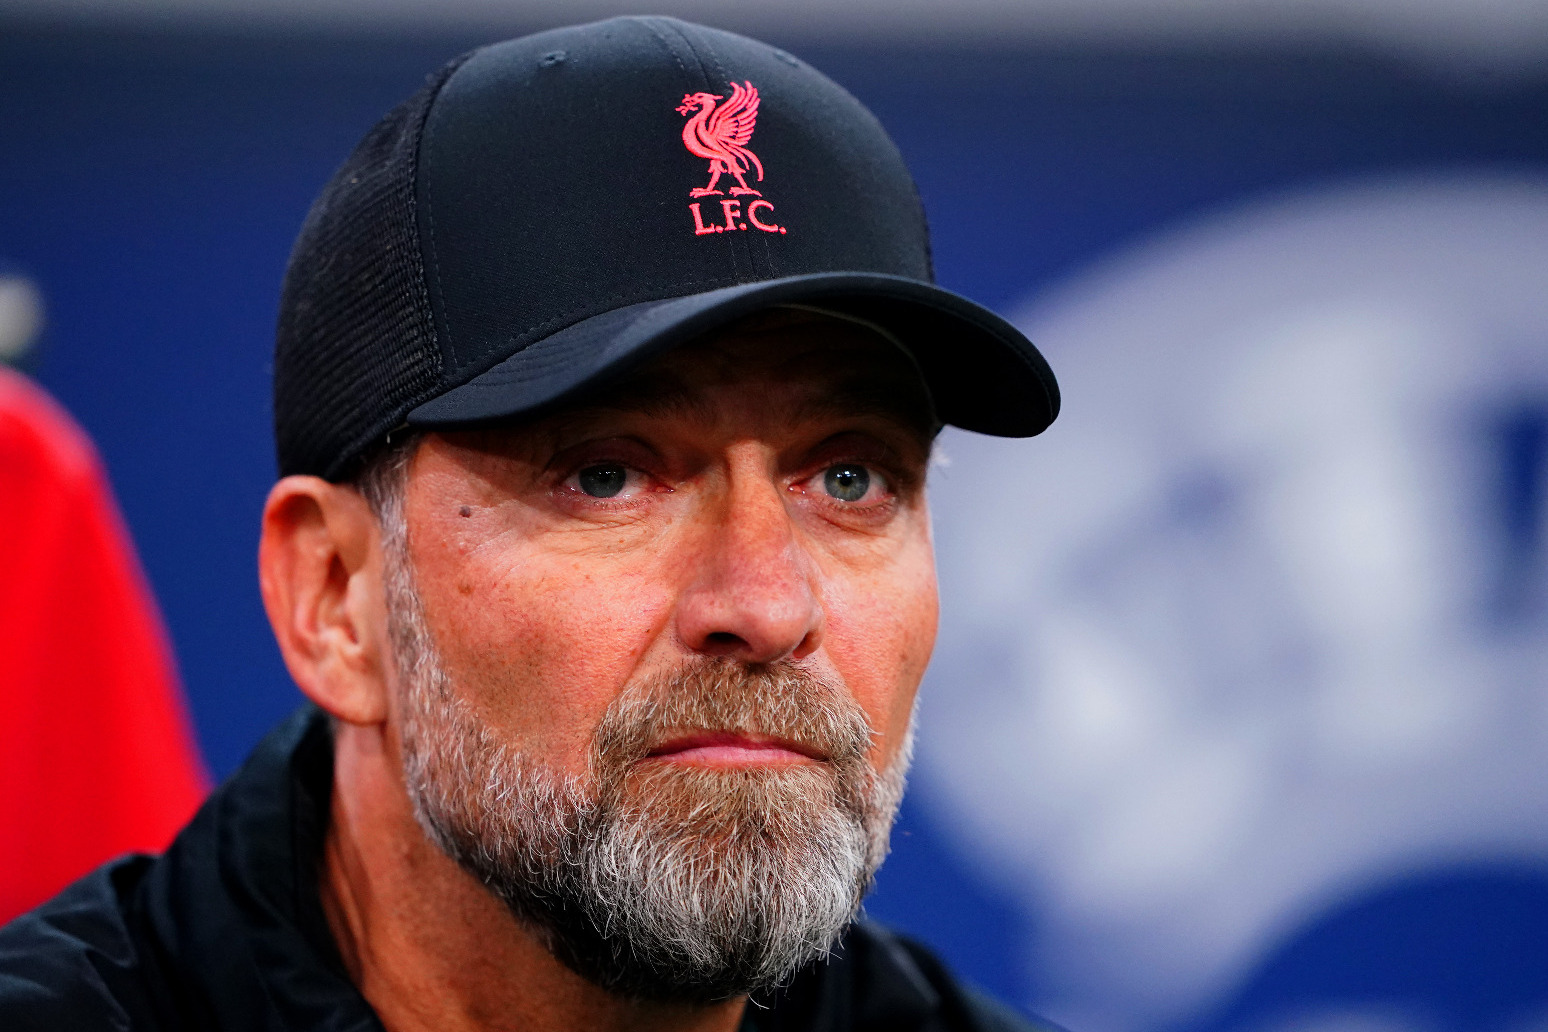 A crazy number – Jurgen Klopp set for 1,000th game as a manager 